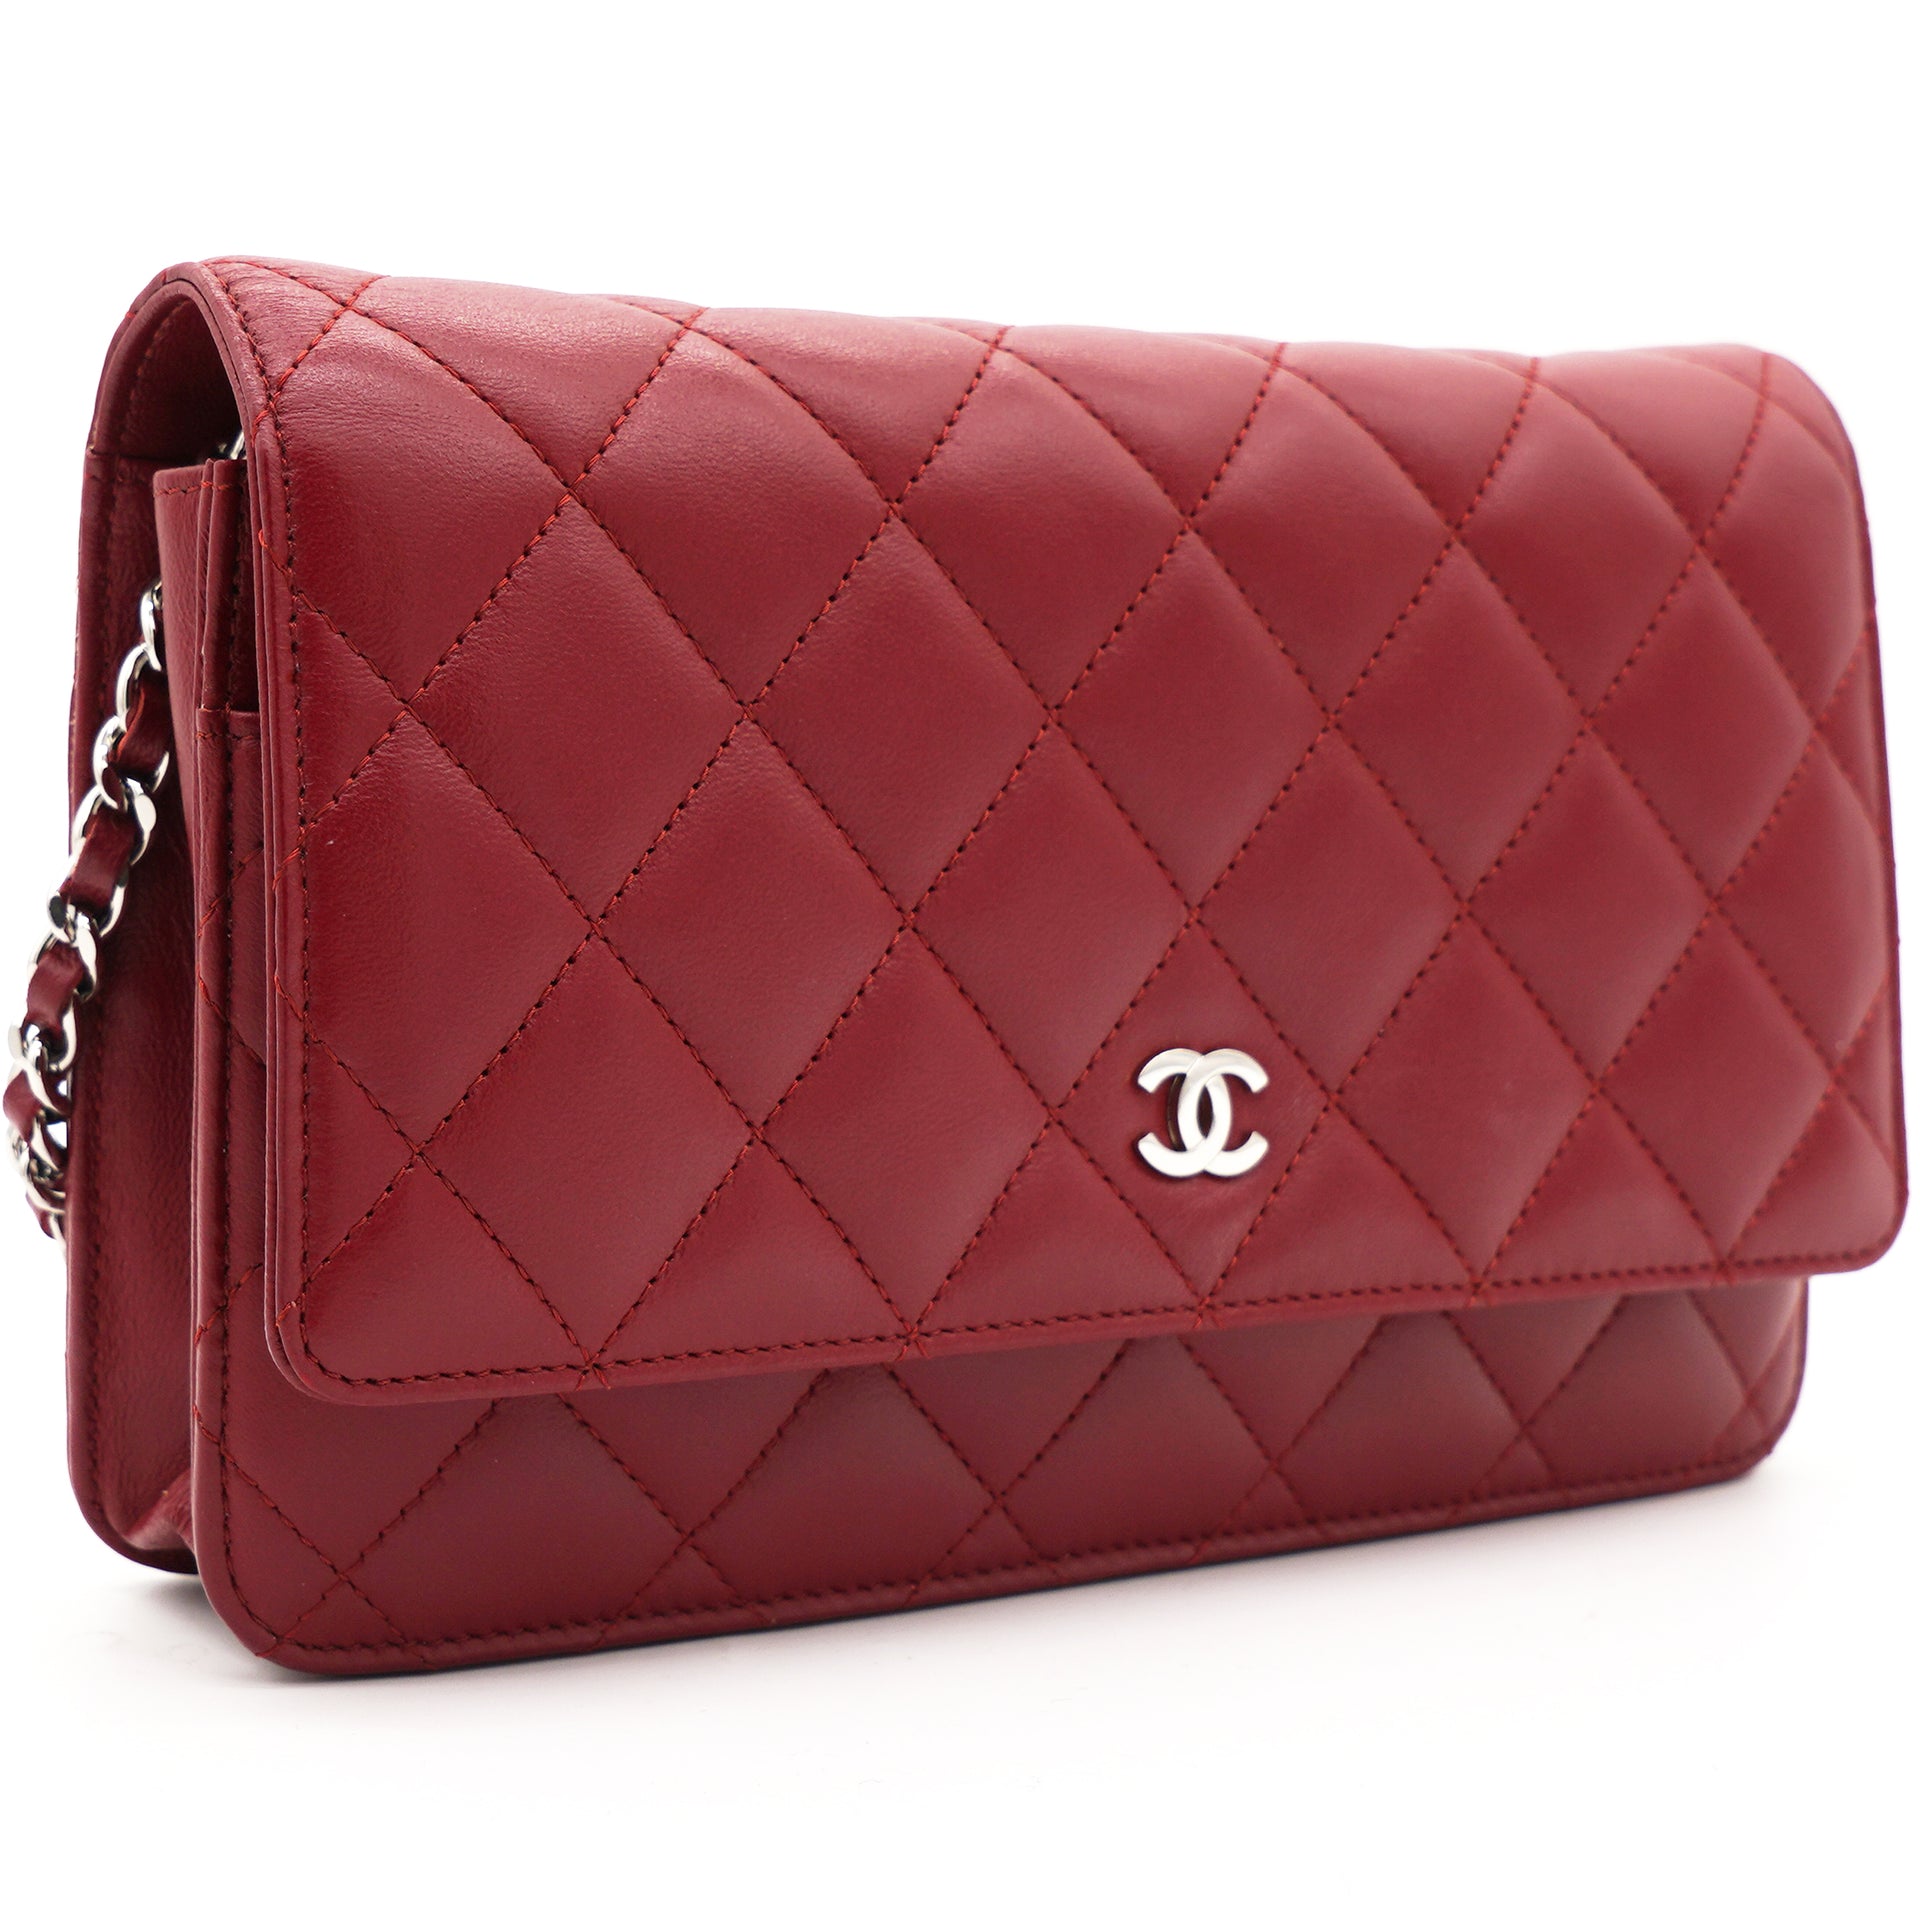 Chanel Woc Flap in Red